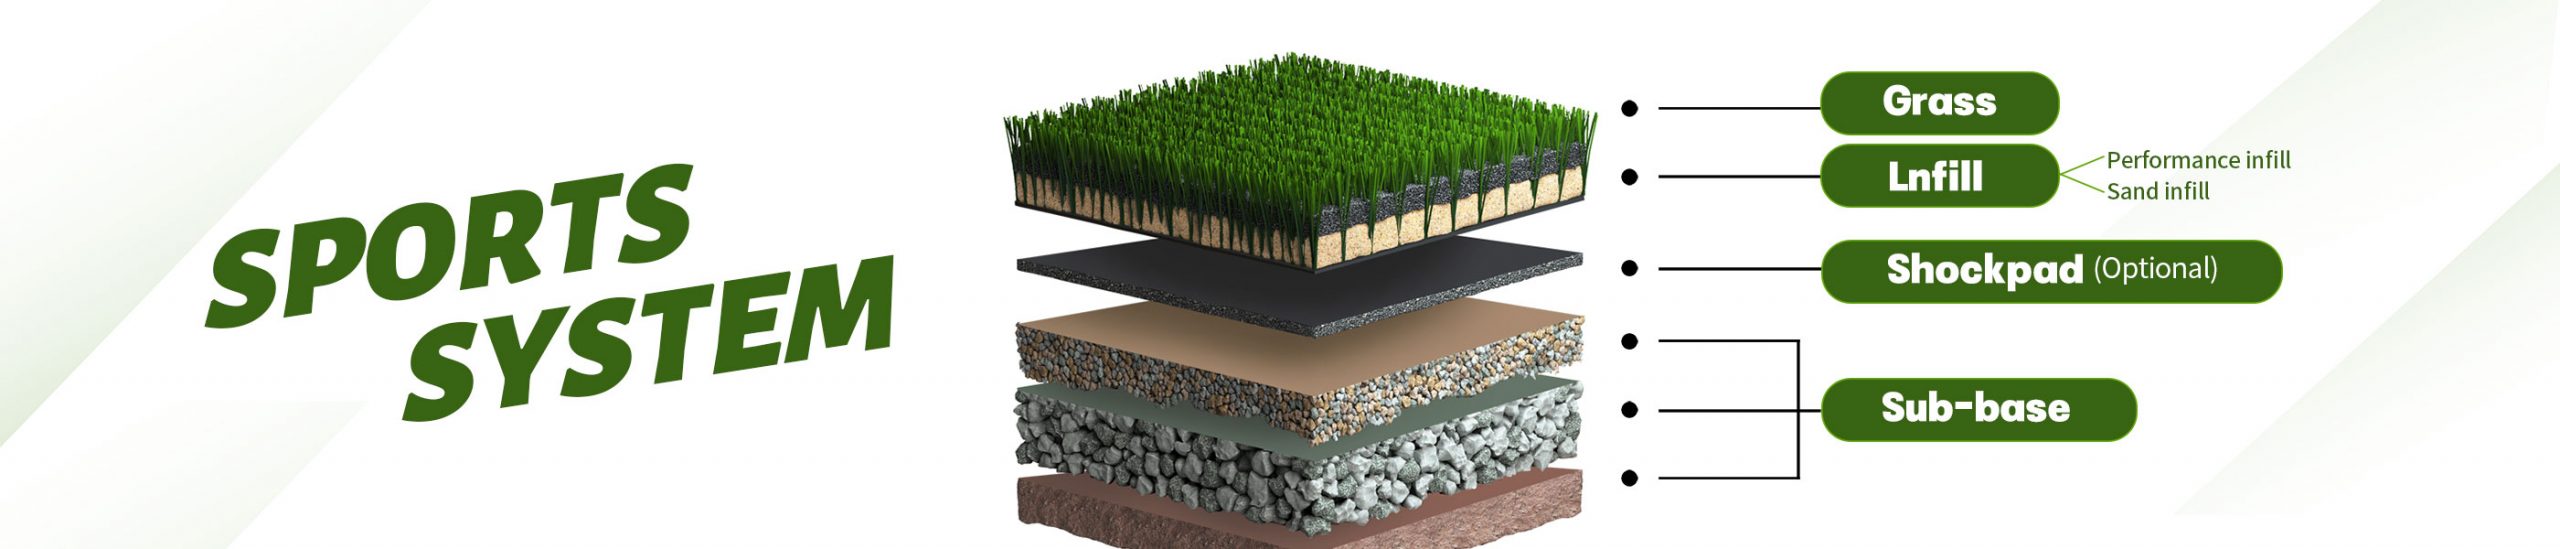 CCGrass, sports system